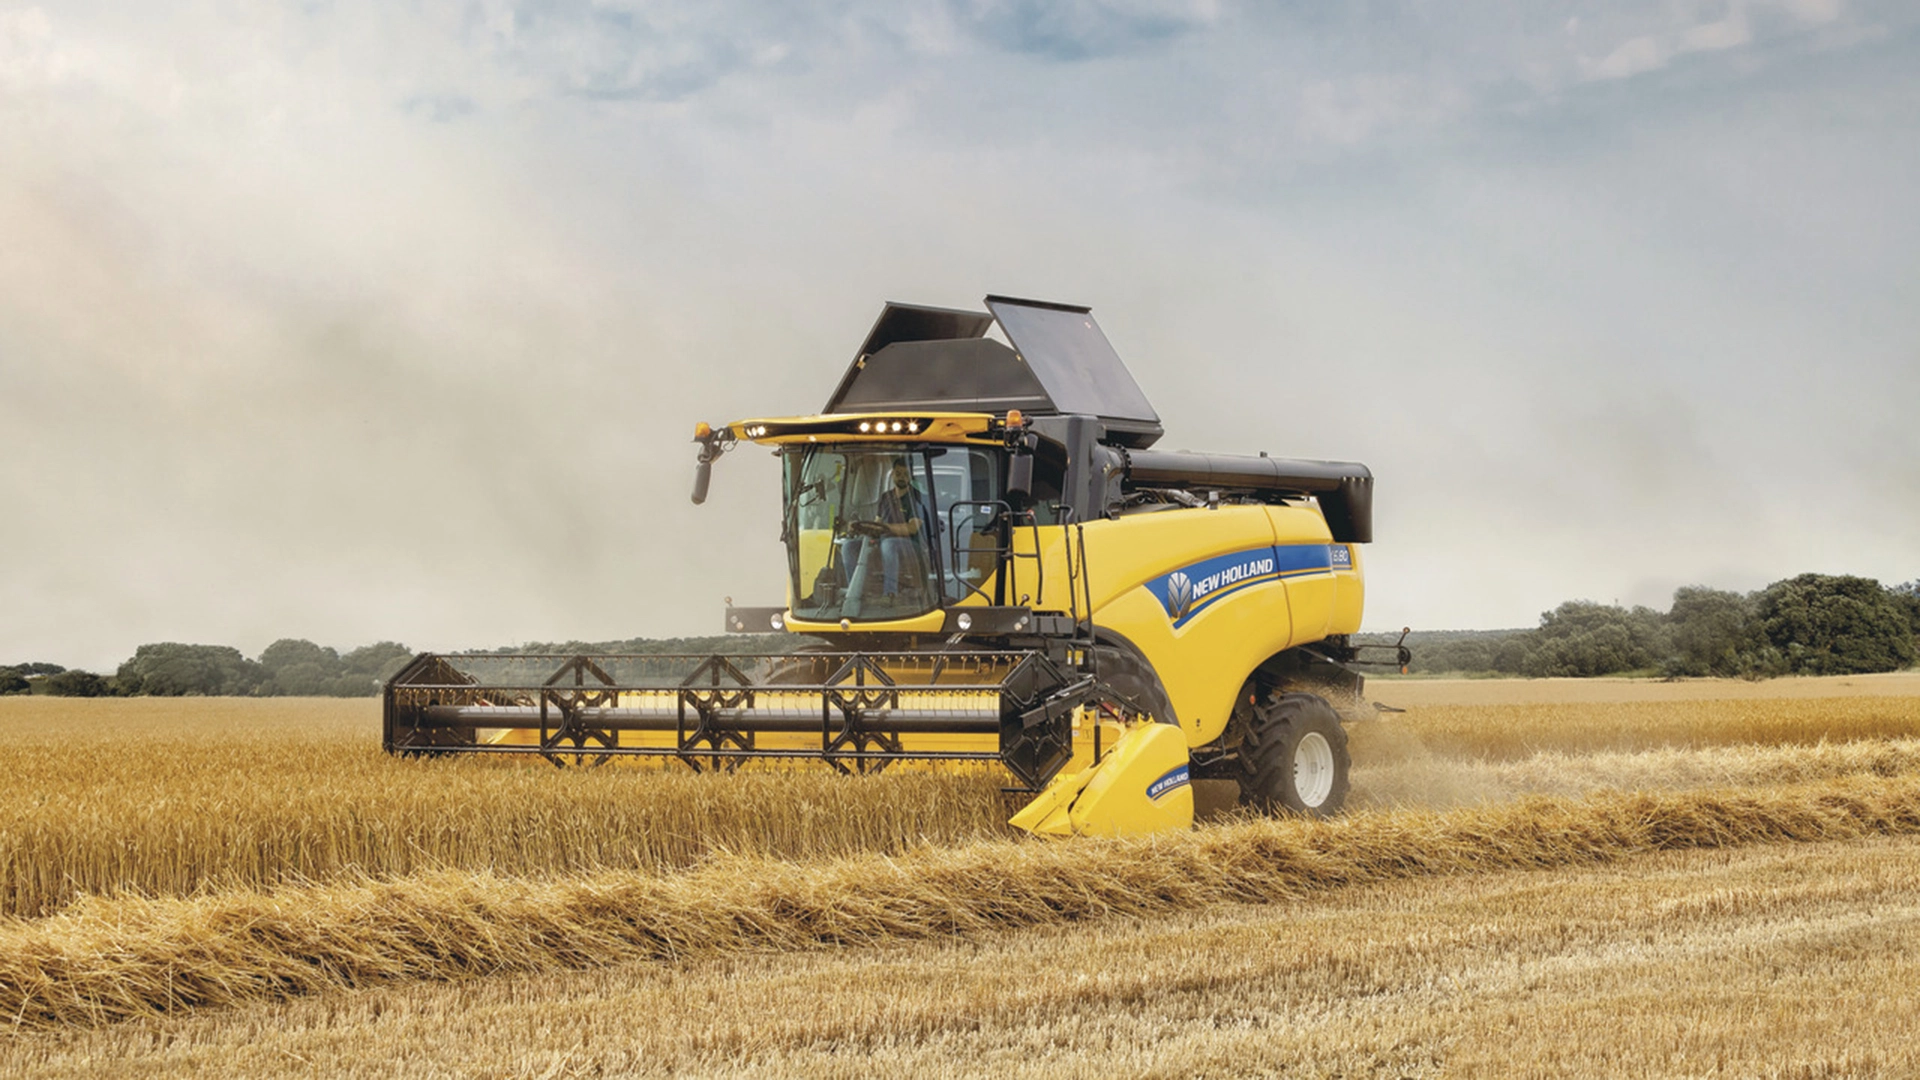 New Holland CX5-CX6 Combine Harvester in action, efficiently harvesting with agricultural combine header